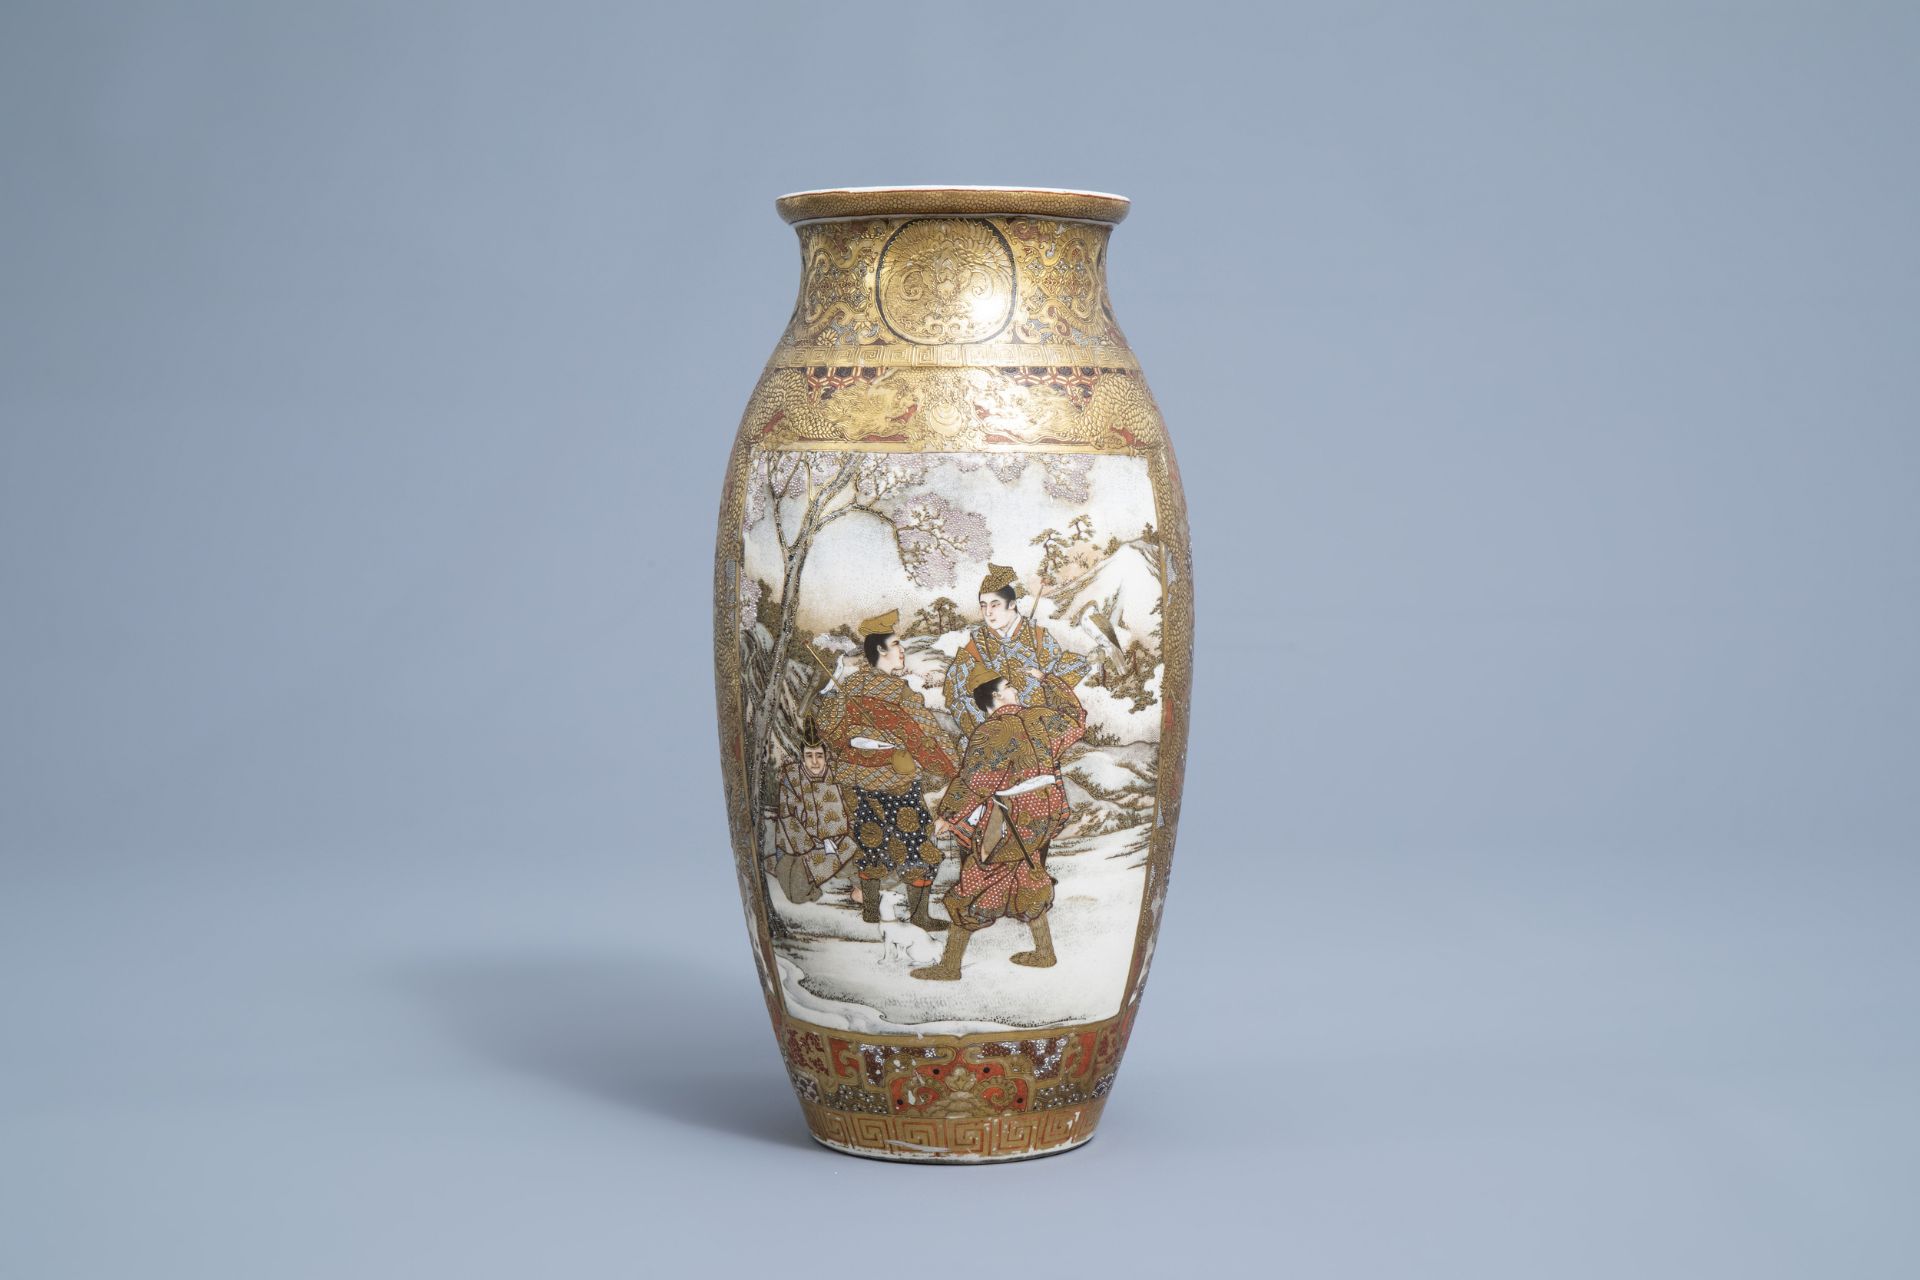 A Japanese Satsuma vase with figures and a samurai in a landscape, Meiji, 19th C. - Image 2 of 7